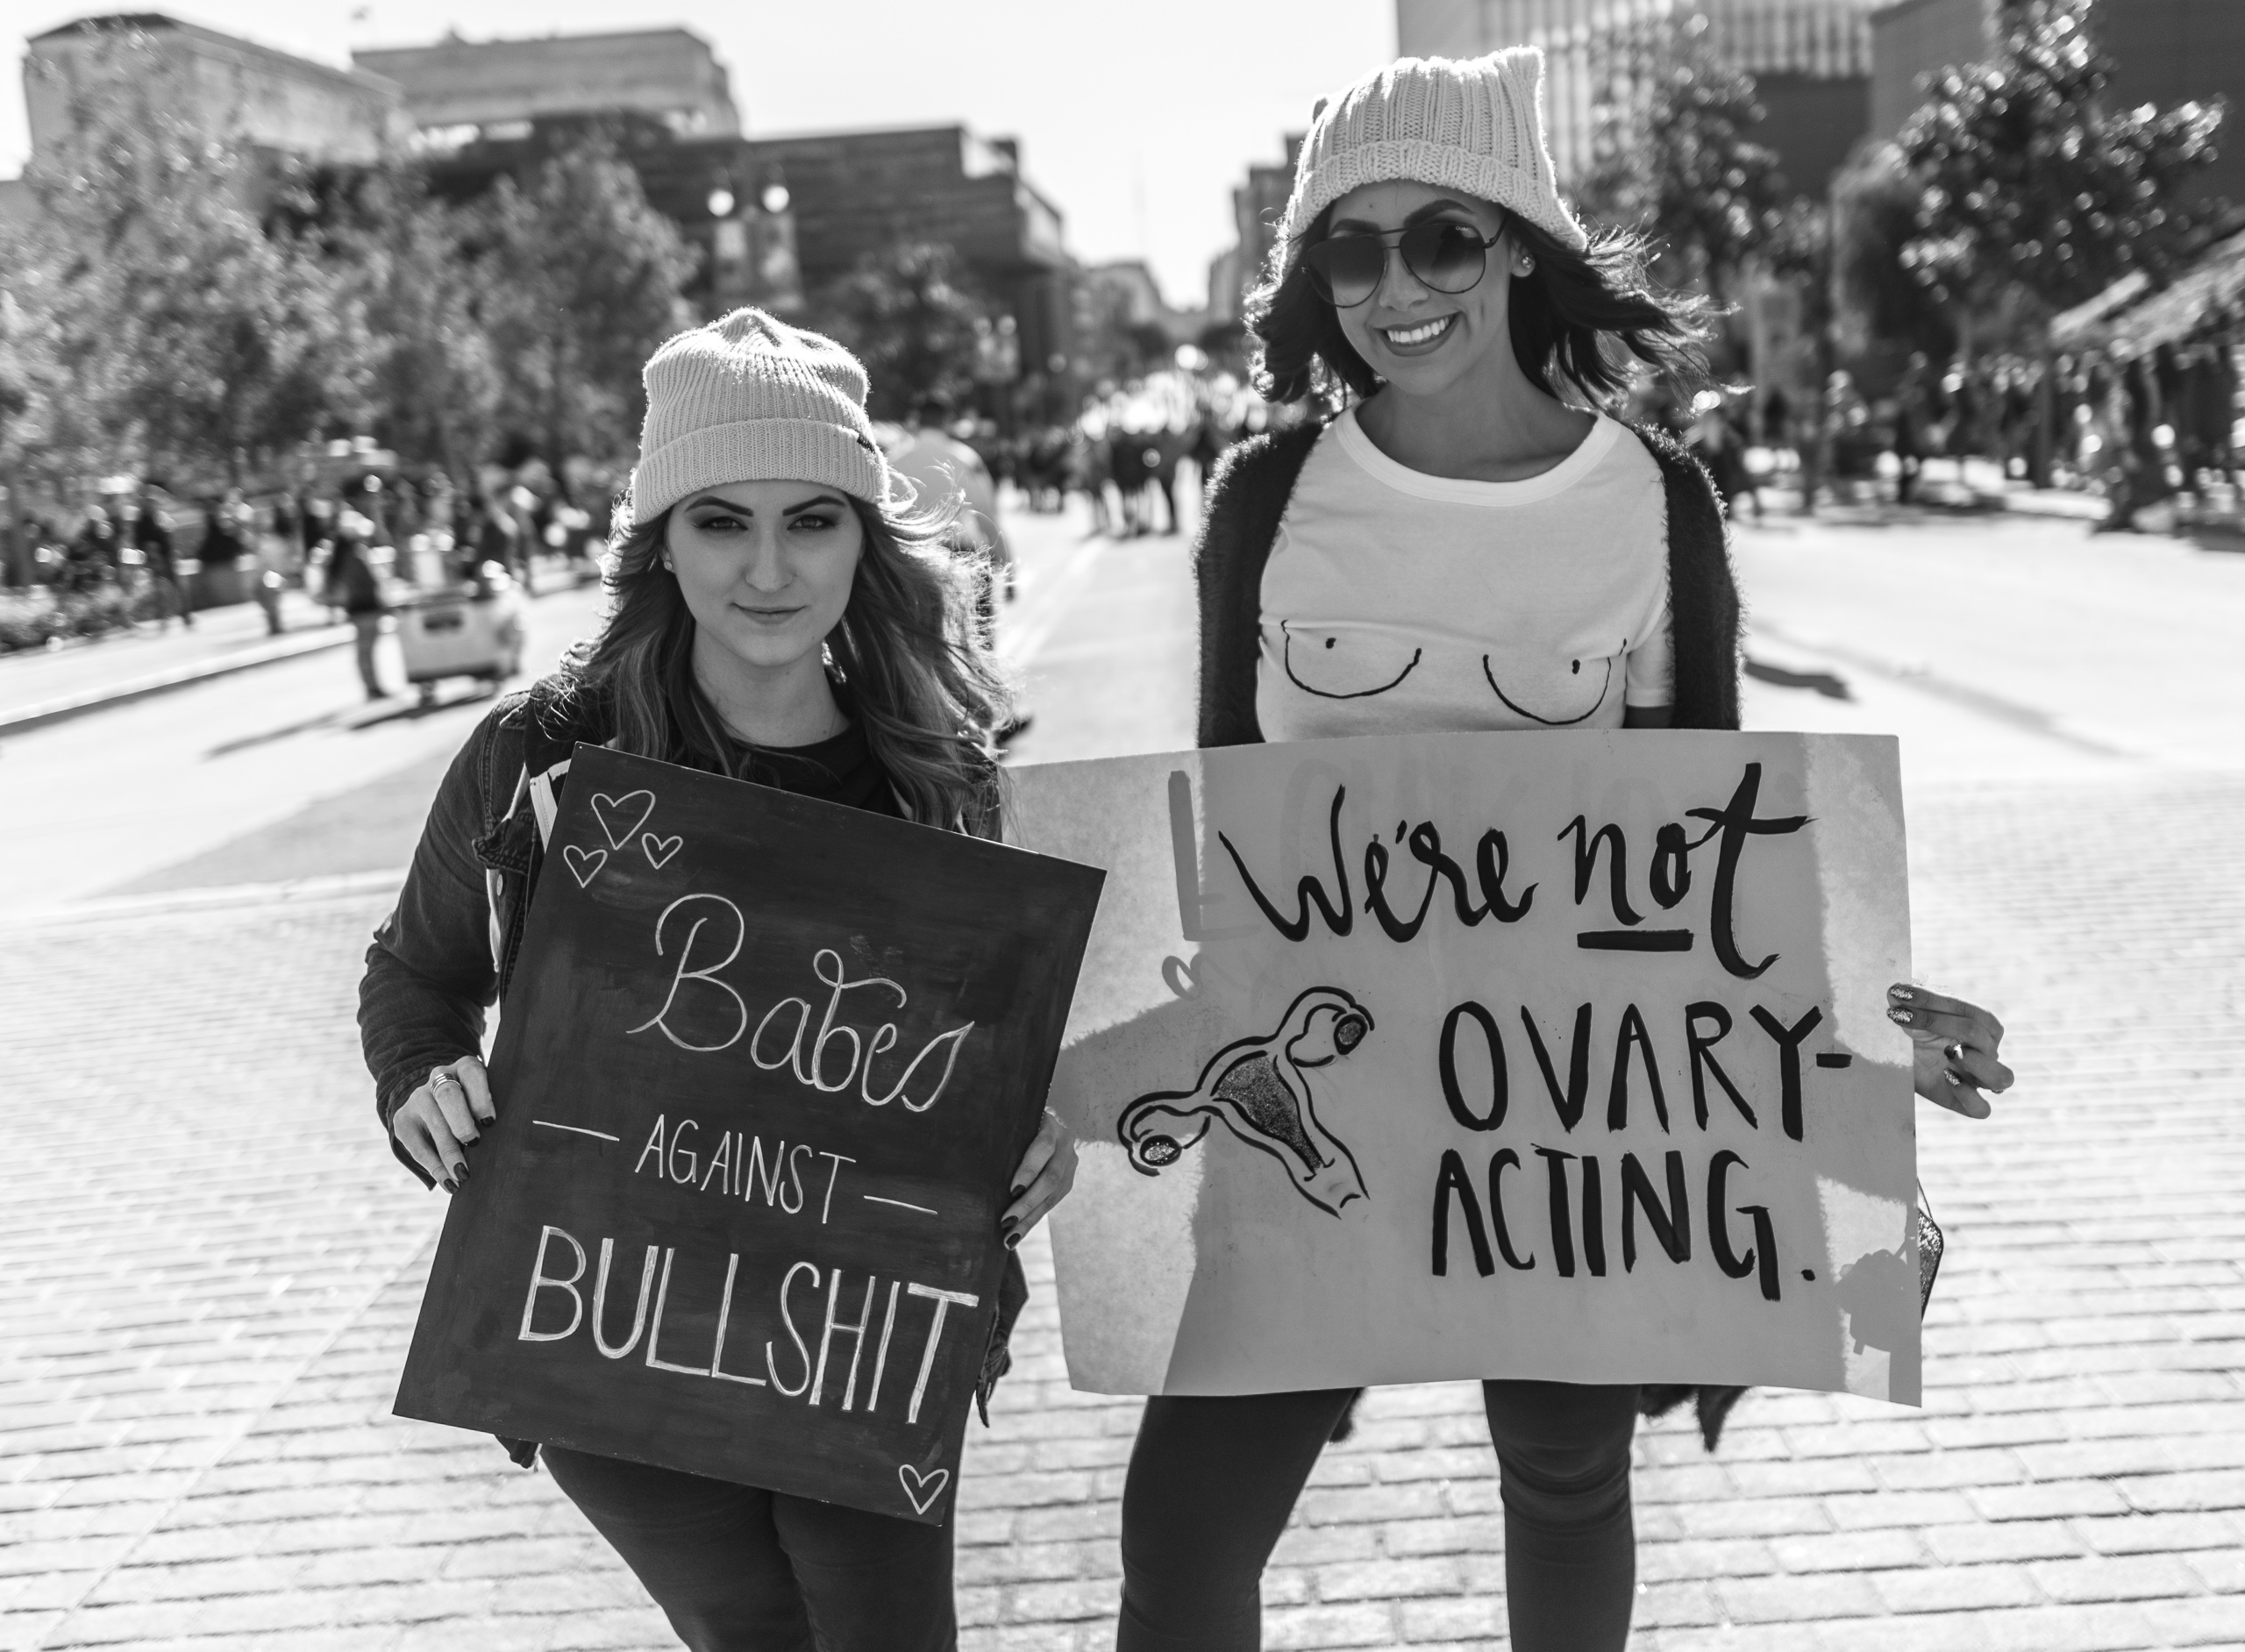 Two friends stand in the street in Downtown Los Angeles at the 2018 Women's March. One holds a sign that reads "Babes against bullshit" and the other holds a sign that reads "We're not ovary acting"